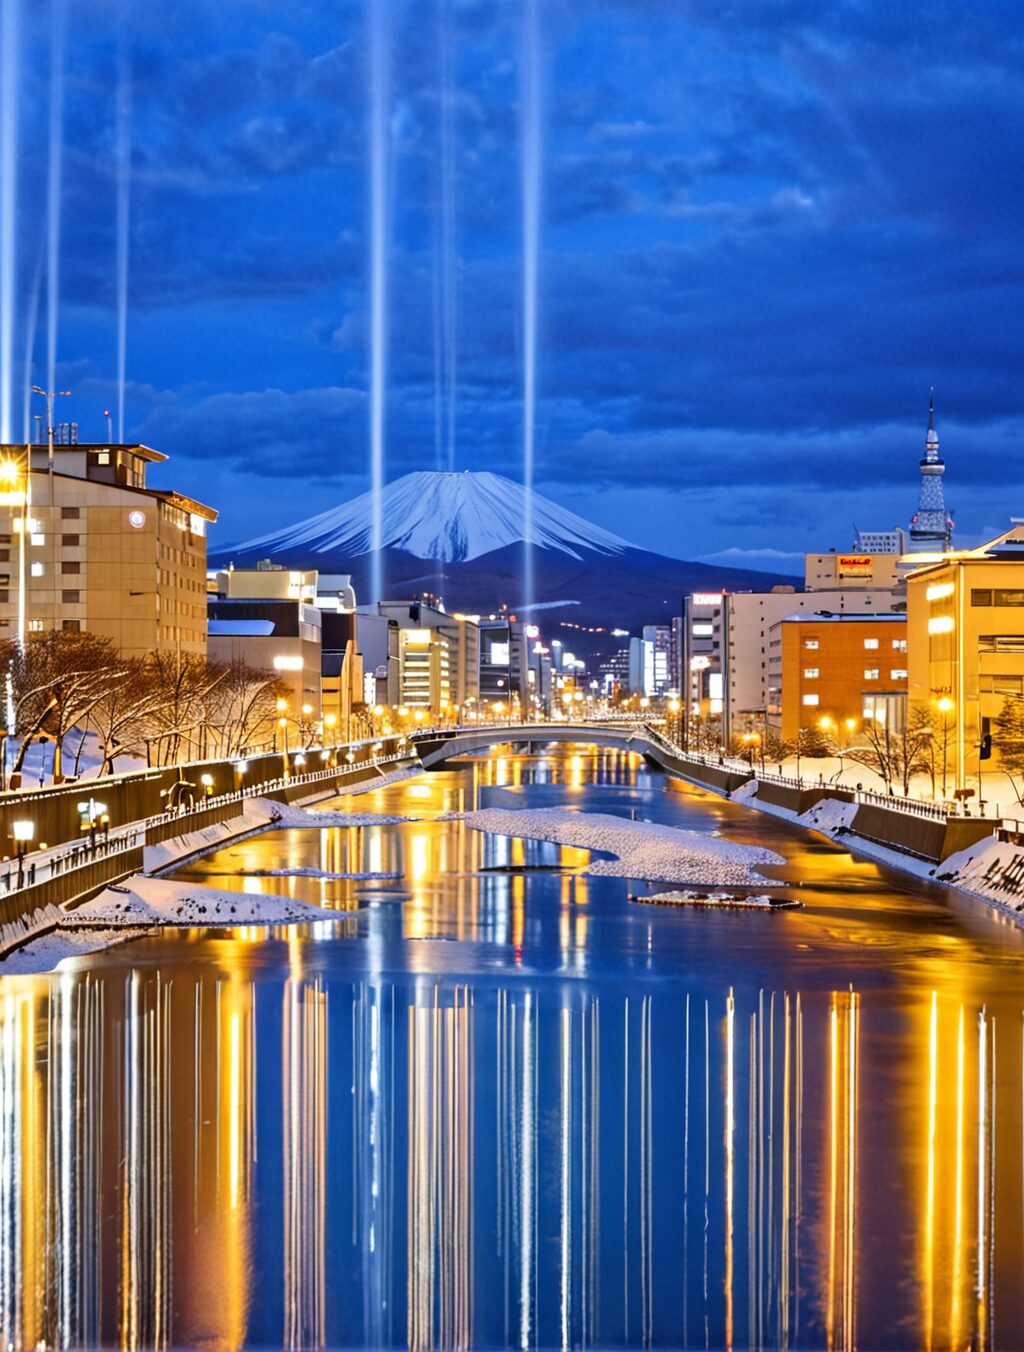 places to stay in sapporo japan